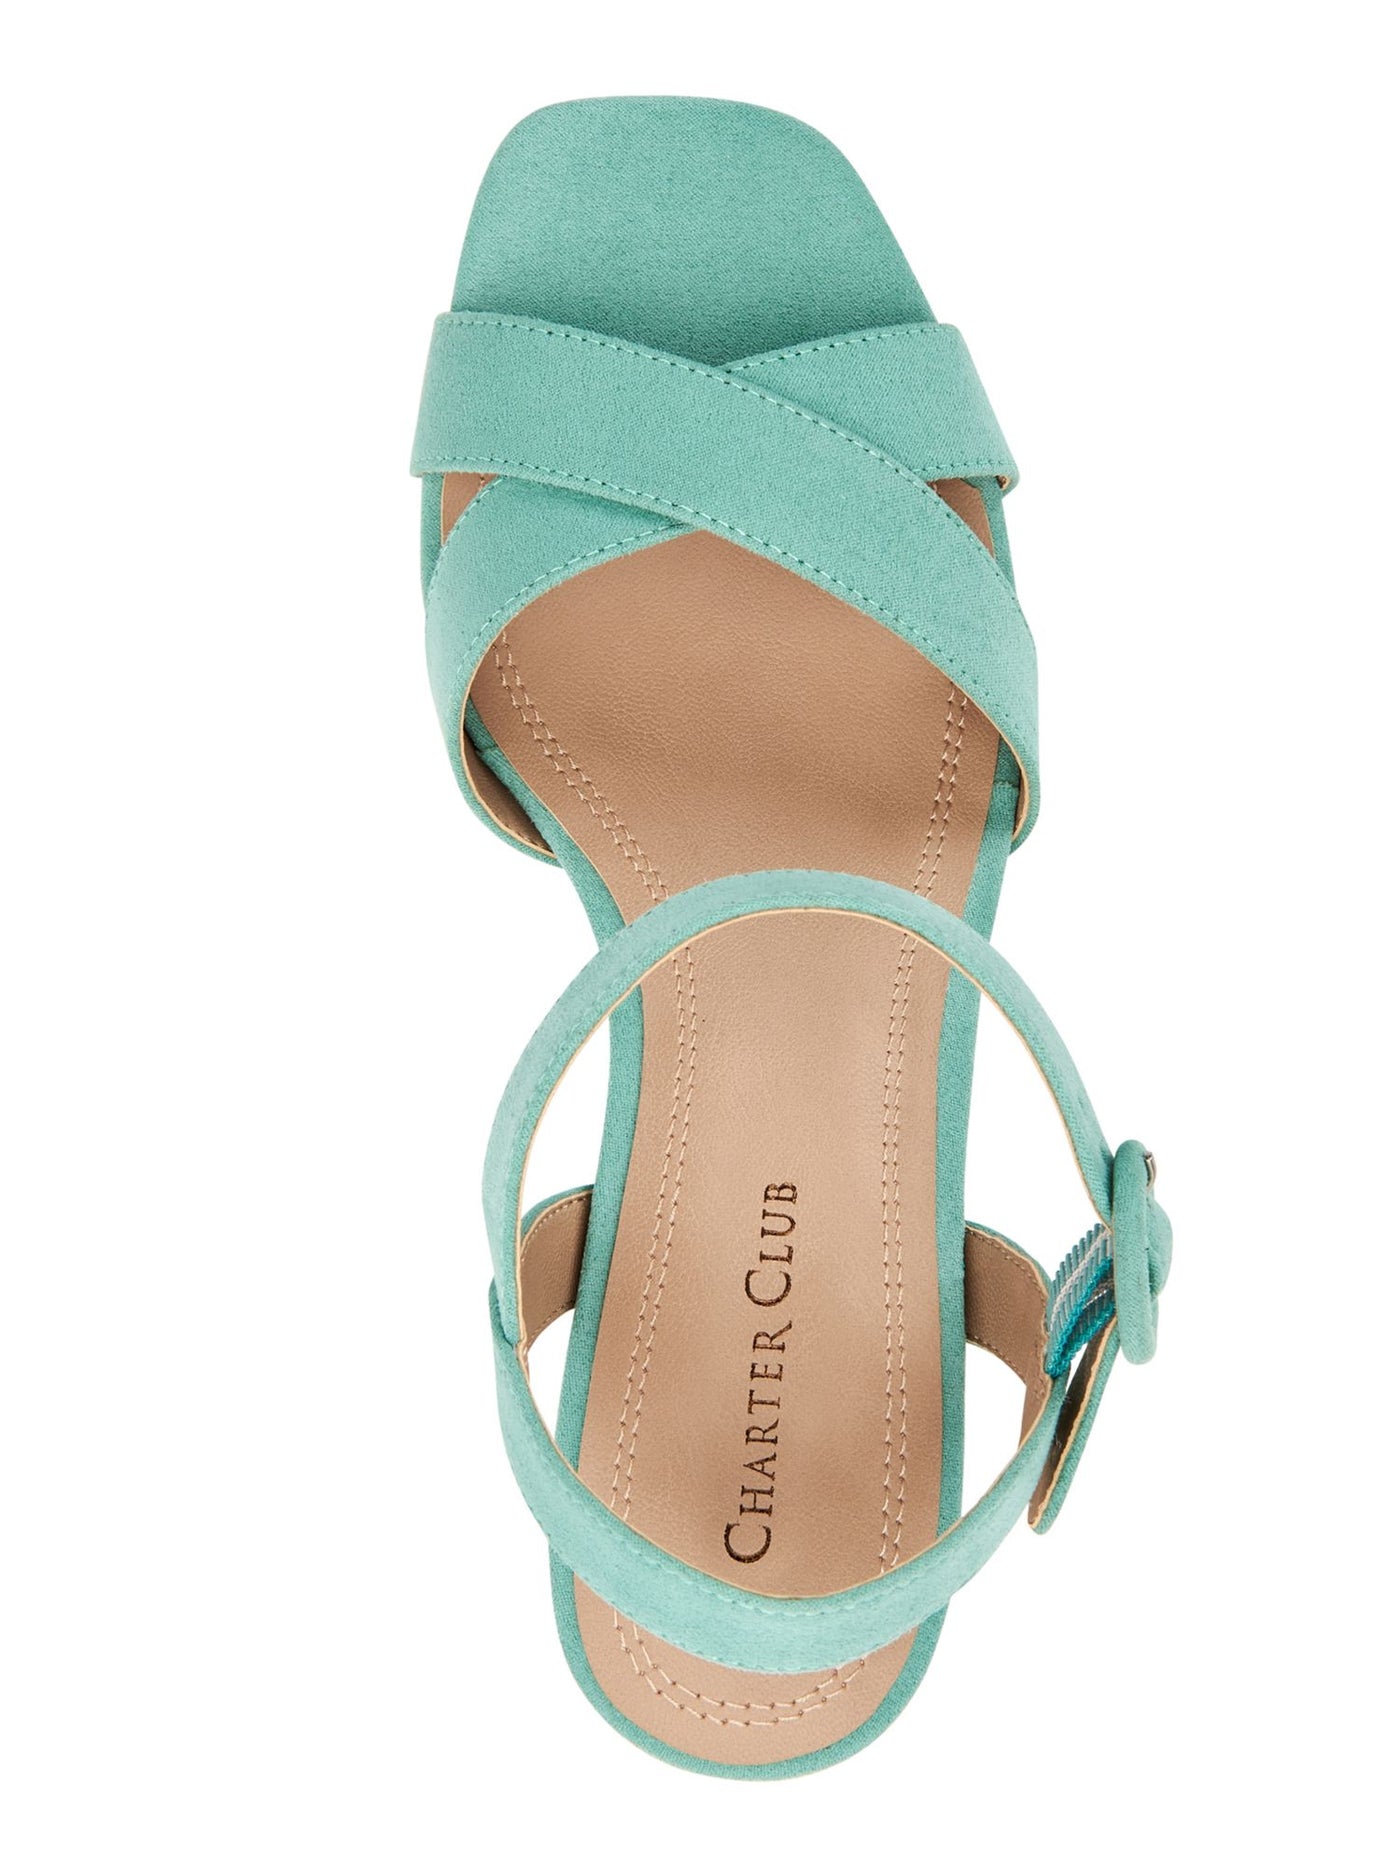 CHARTER CLUB Womens Turquoise Crisscross Straps Espadrille Heel Strappy Ankle Strap Padded Rioo Square Toe Block Heel Buckle Dress Slingback Sandal M